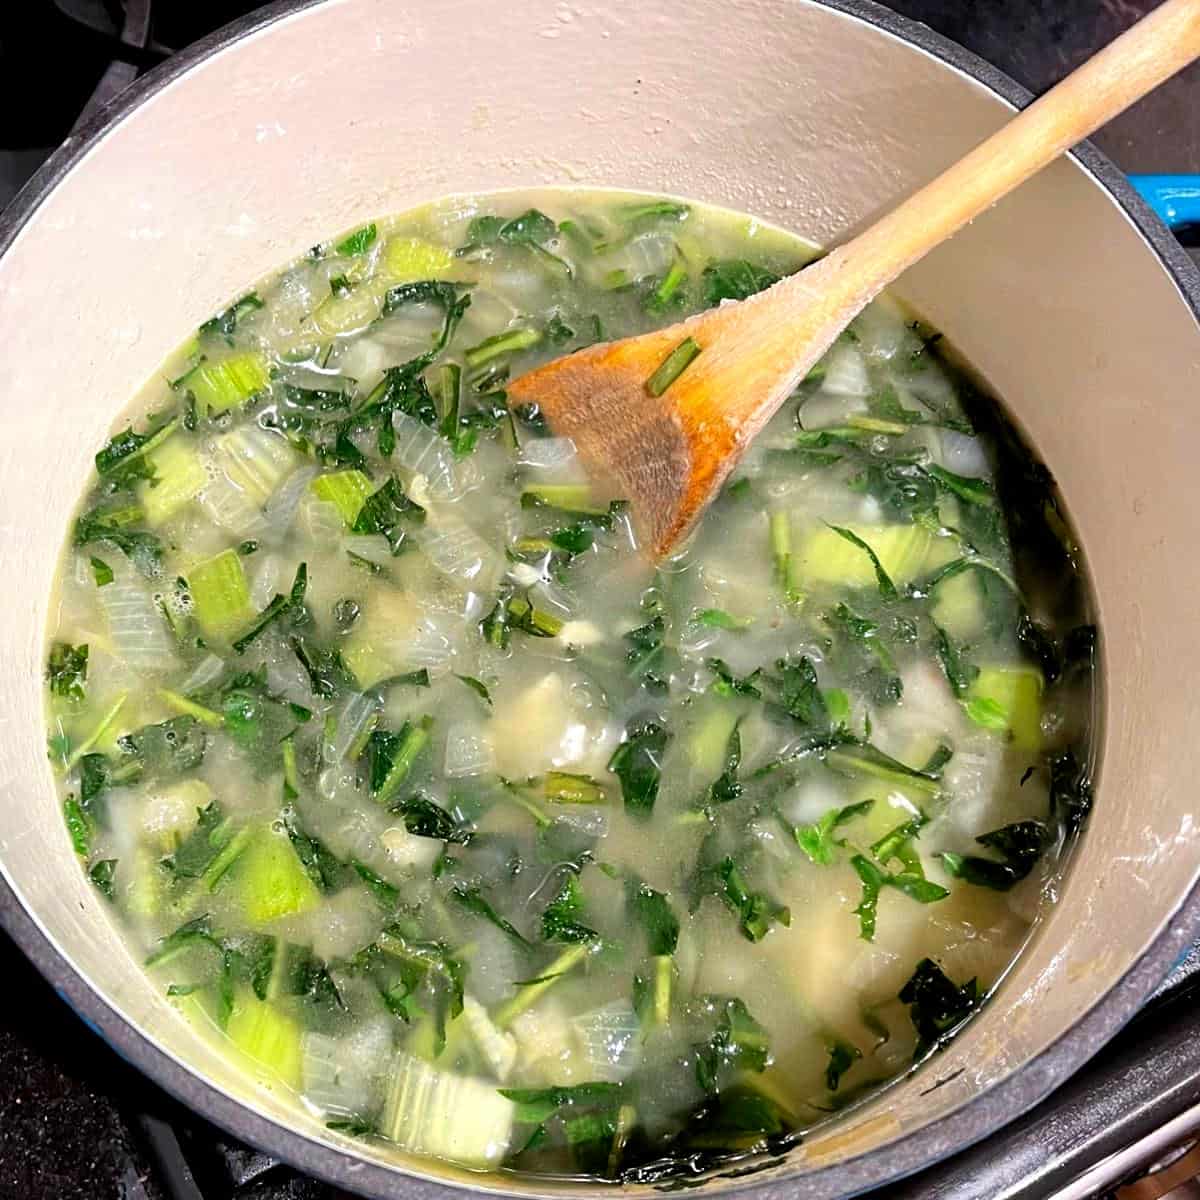 Water added to dandelion greens, onions and celery in Dutch oven.